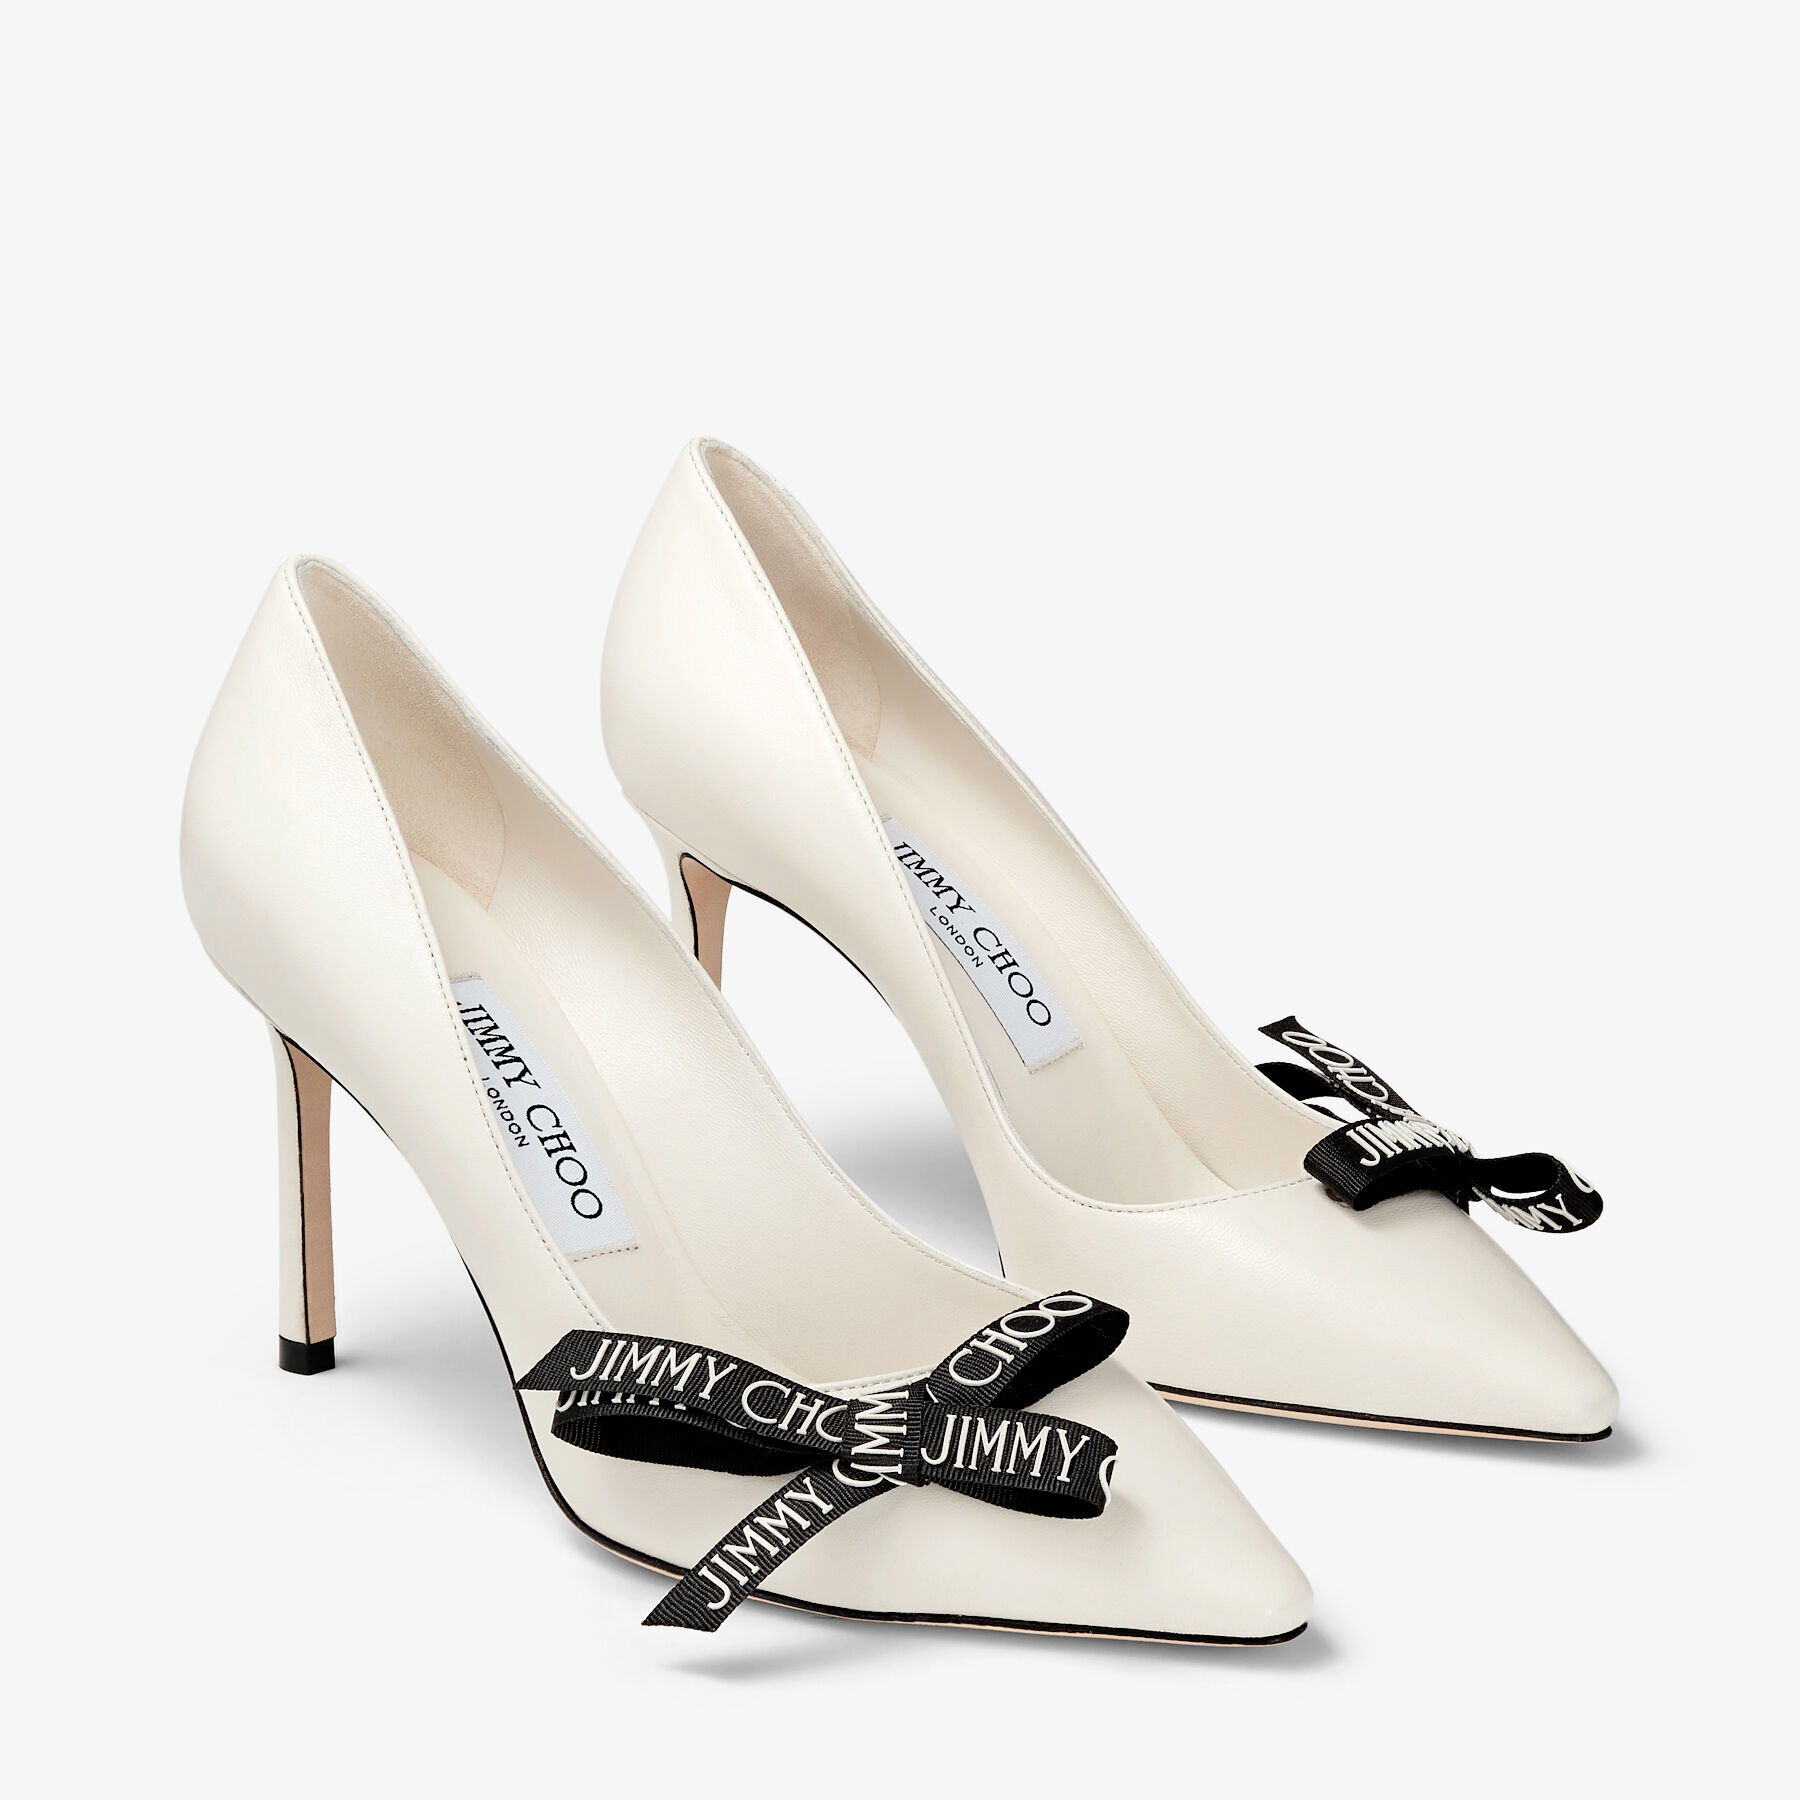 ROMY 85 | Latte Nappa Leather Pumps with Jimmy Choo Bow | Spring 